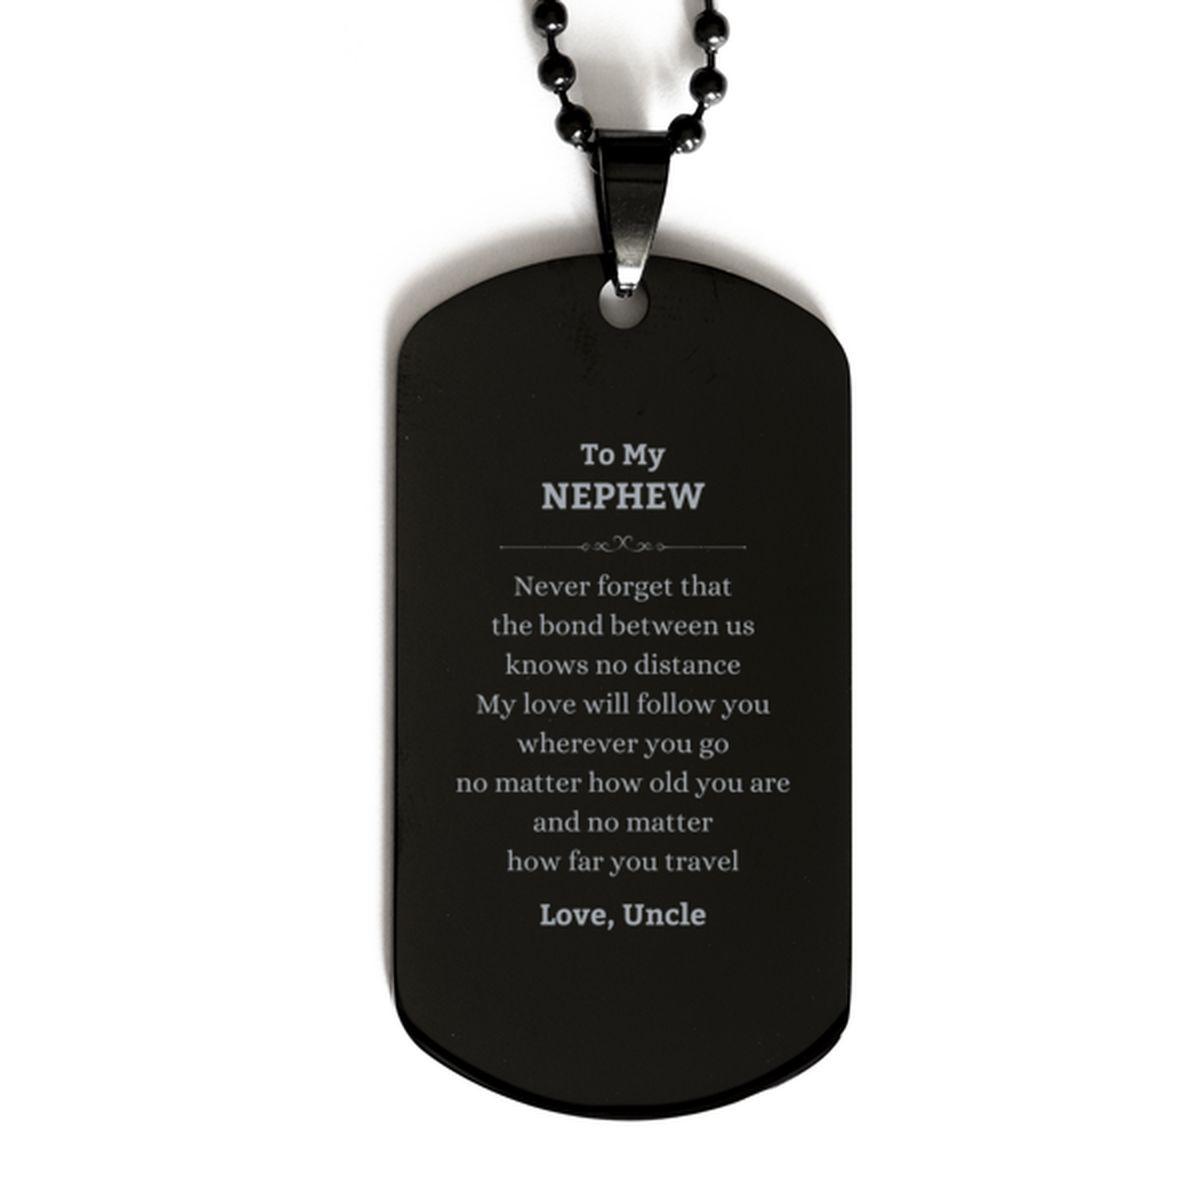 Nephew Birthday Gifts from Uncle, Adjustable Black Dog Tag for Nephew Christmas Graduation Unique Gifts Nephew Never forget that the bond between us knows no distance. Love, Uncle